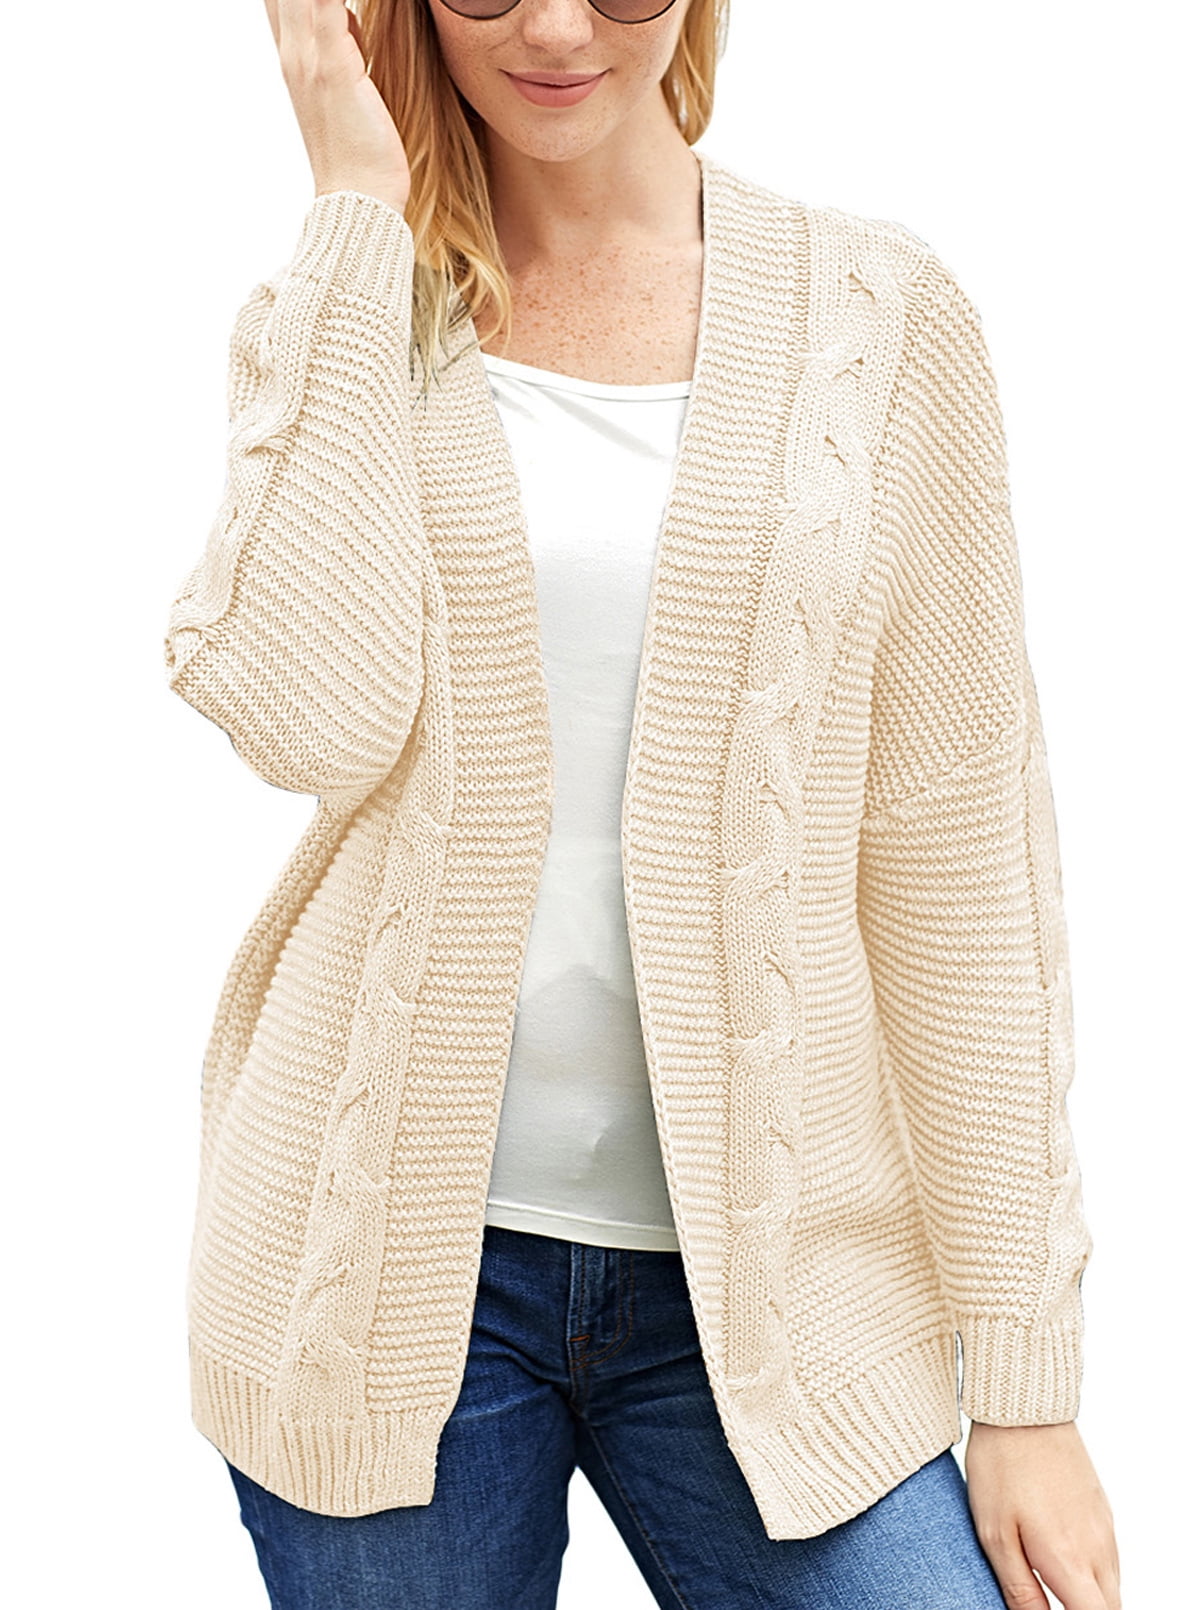 Womens Fine Knit Stretchy Jumper Ladies Warm Plain Open Front Cardigan Top 